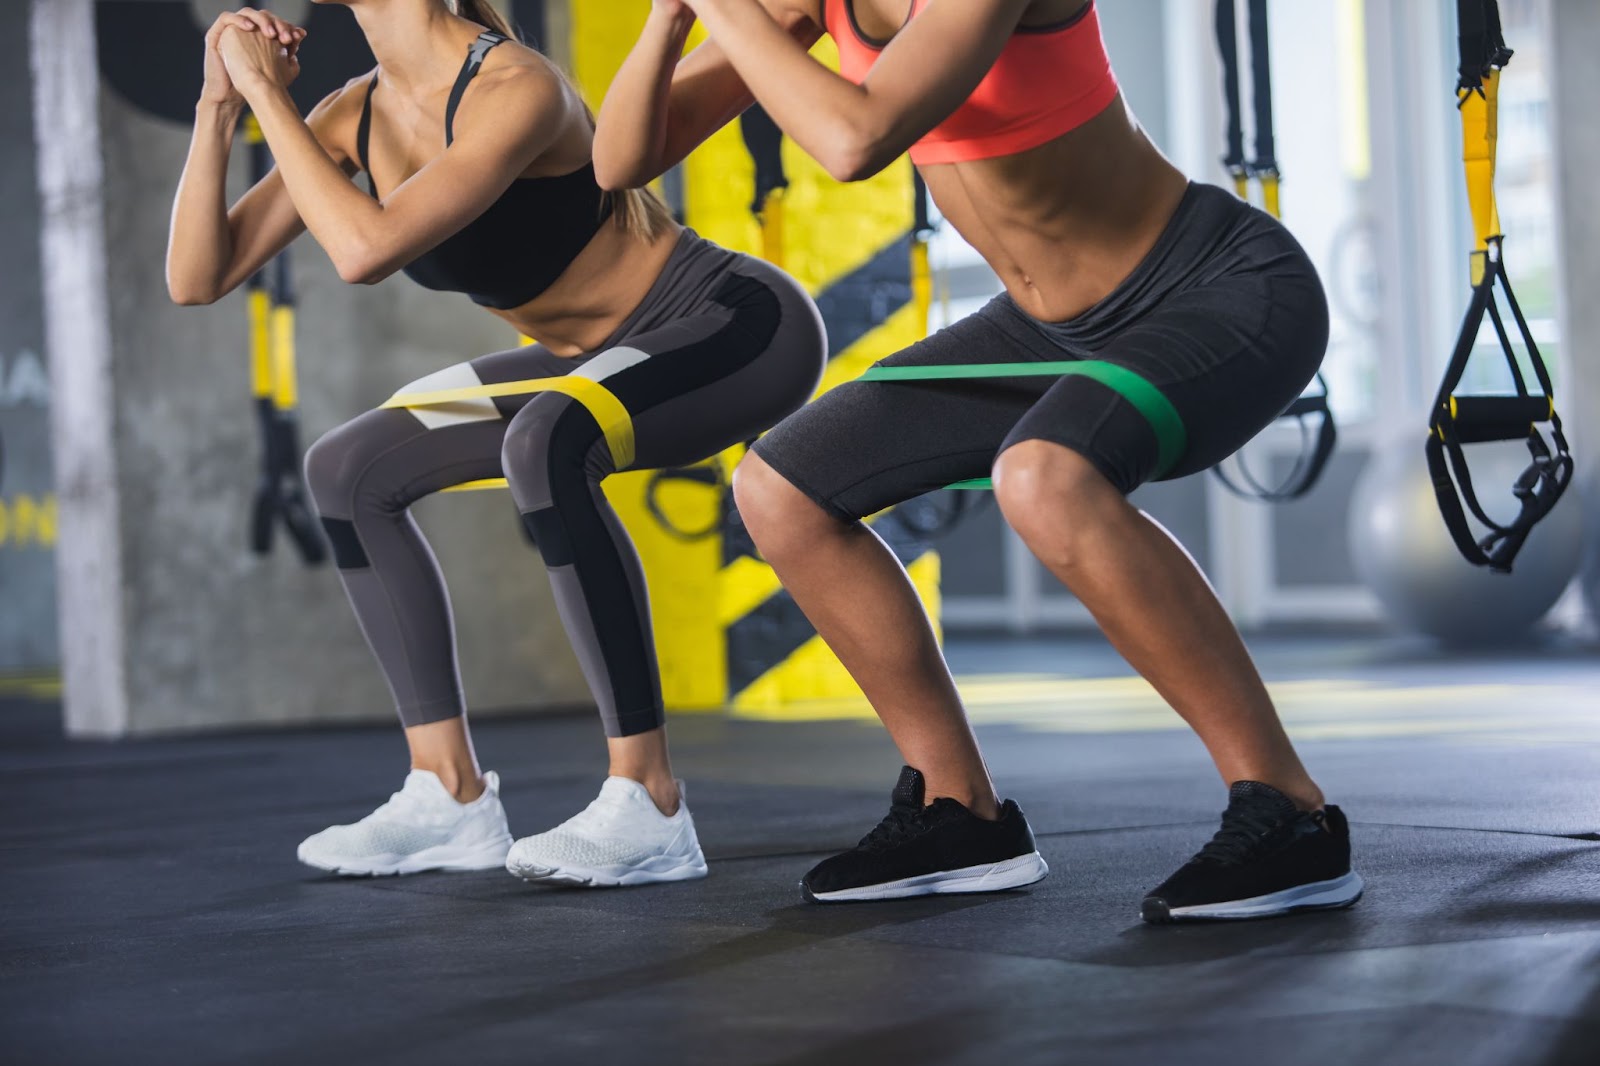 Two women working out next to each other with resistance bands